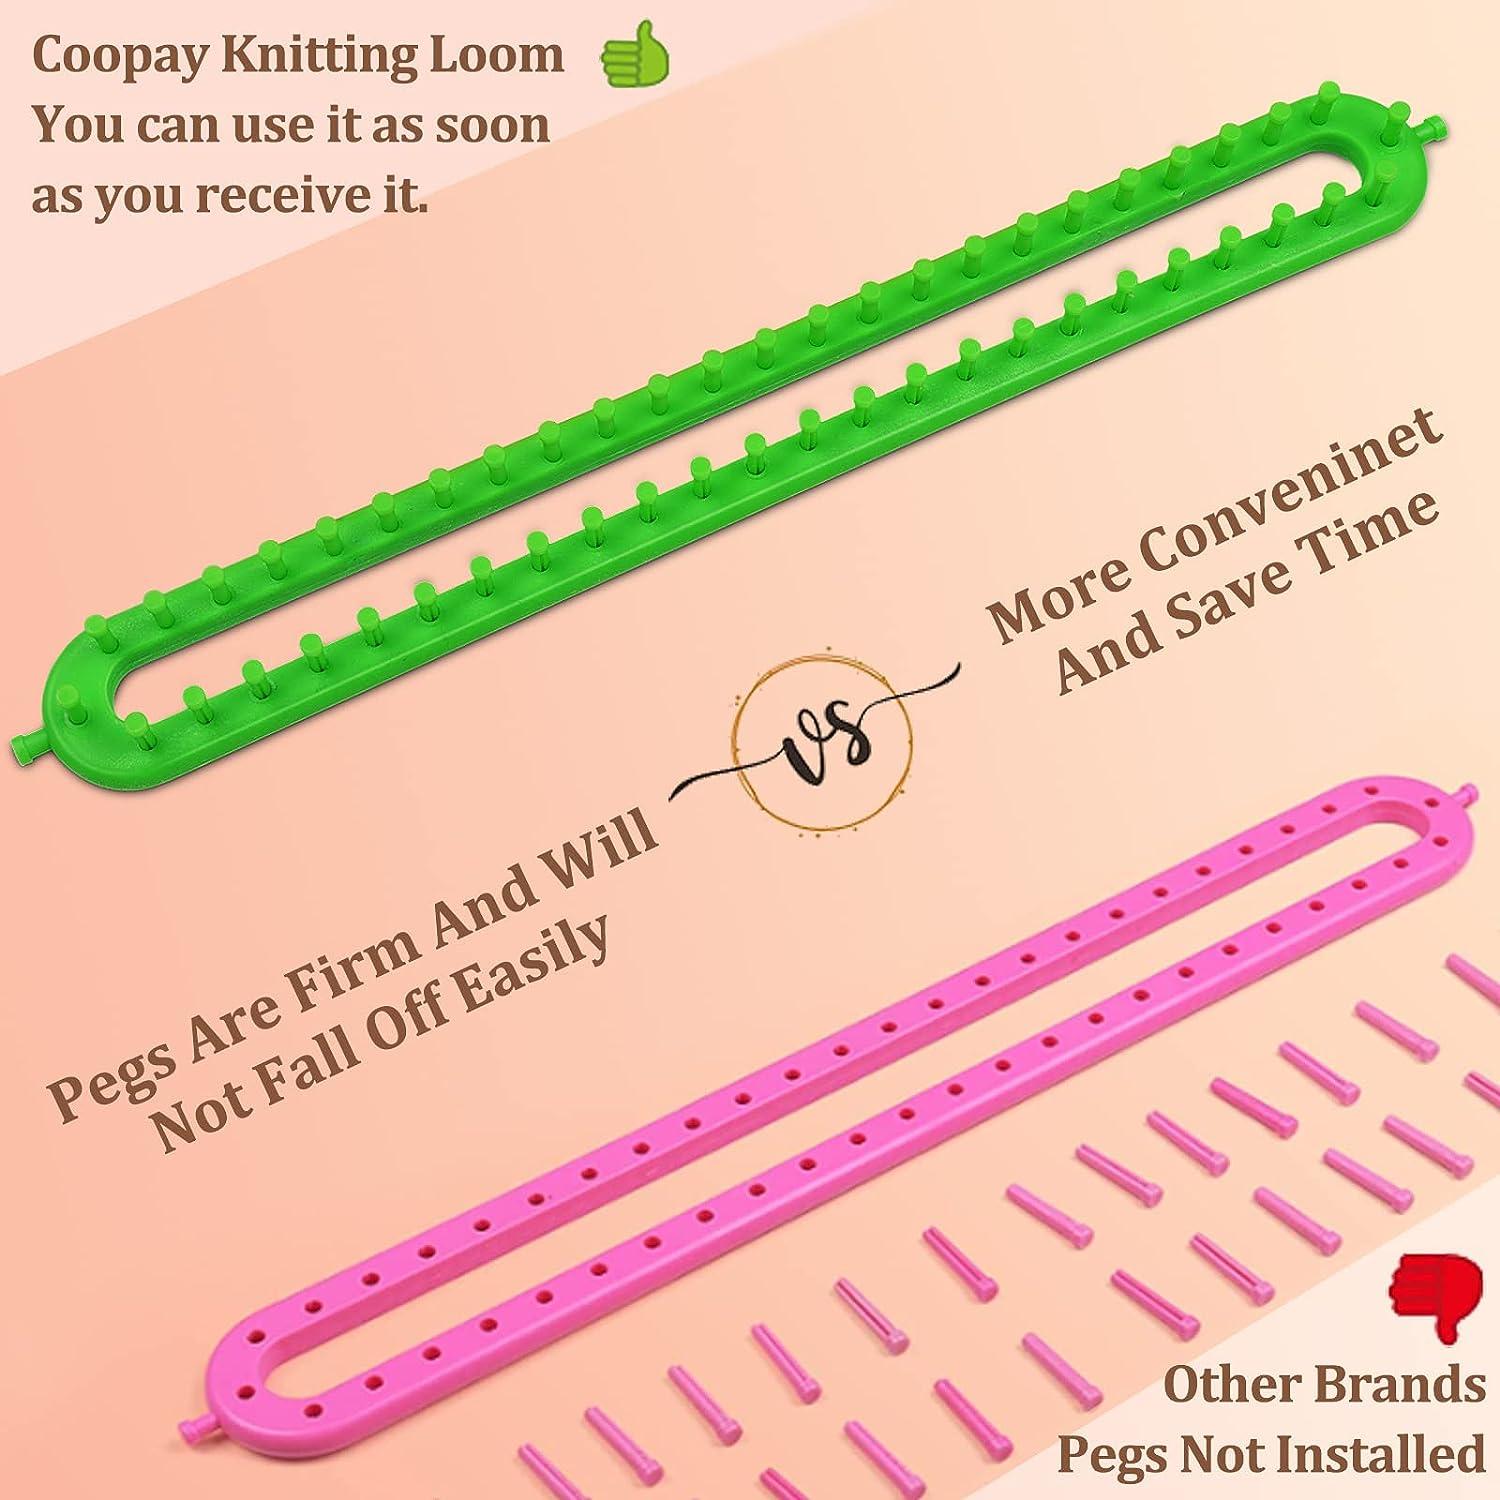  Coopay Scarf Loom Kit for Kids, Rectangular Knitting Board  Looms with DIY Craft Crochet Needle and Plastic Needle, Easy to Follow,  Creativity for Kids Beginner, Making for Scarf, Sweater, Shawl, Hat 